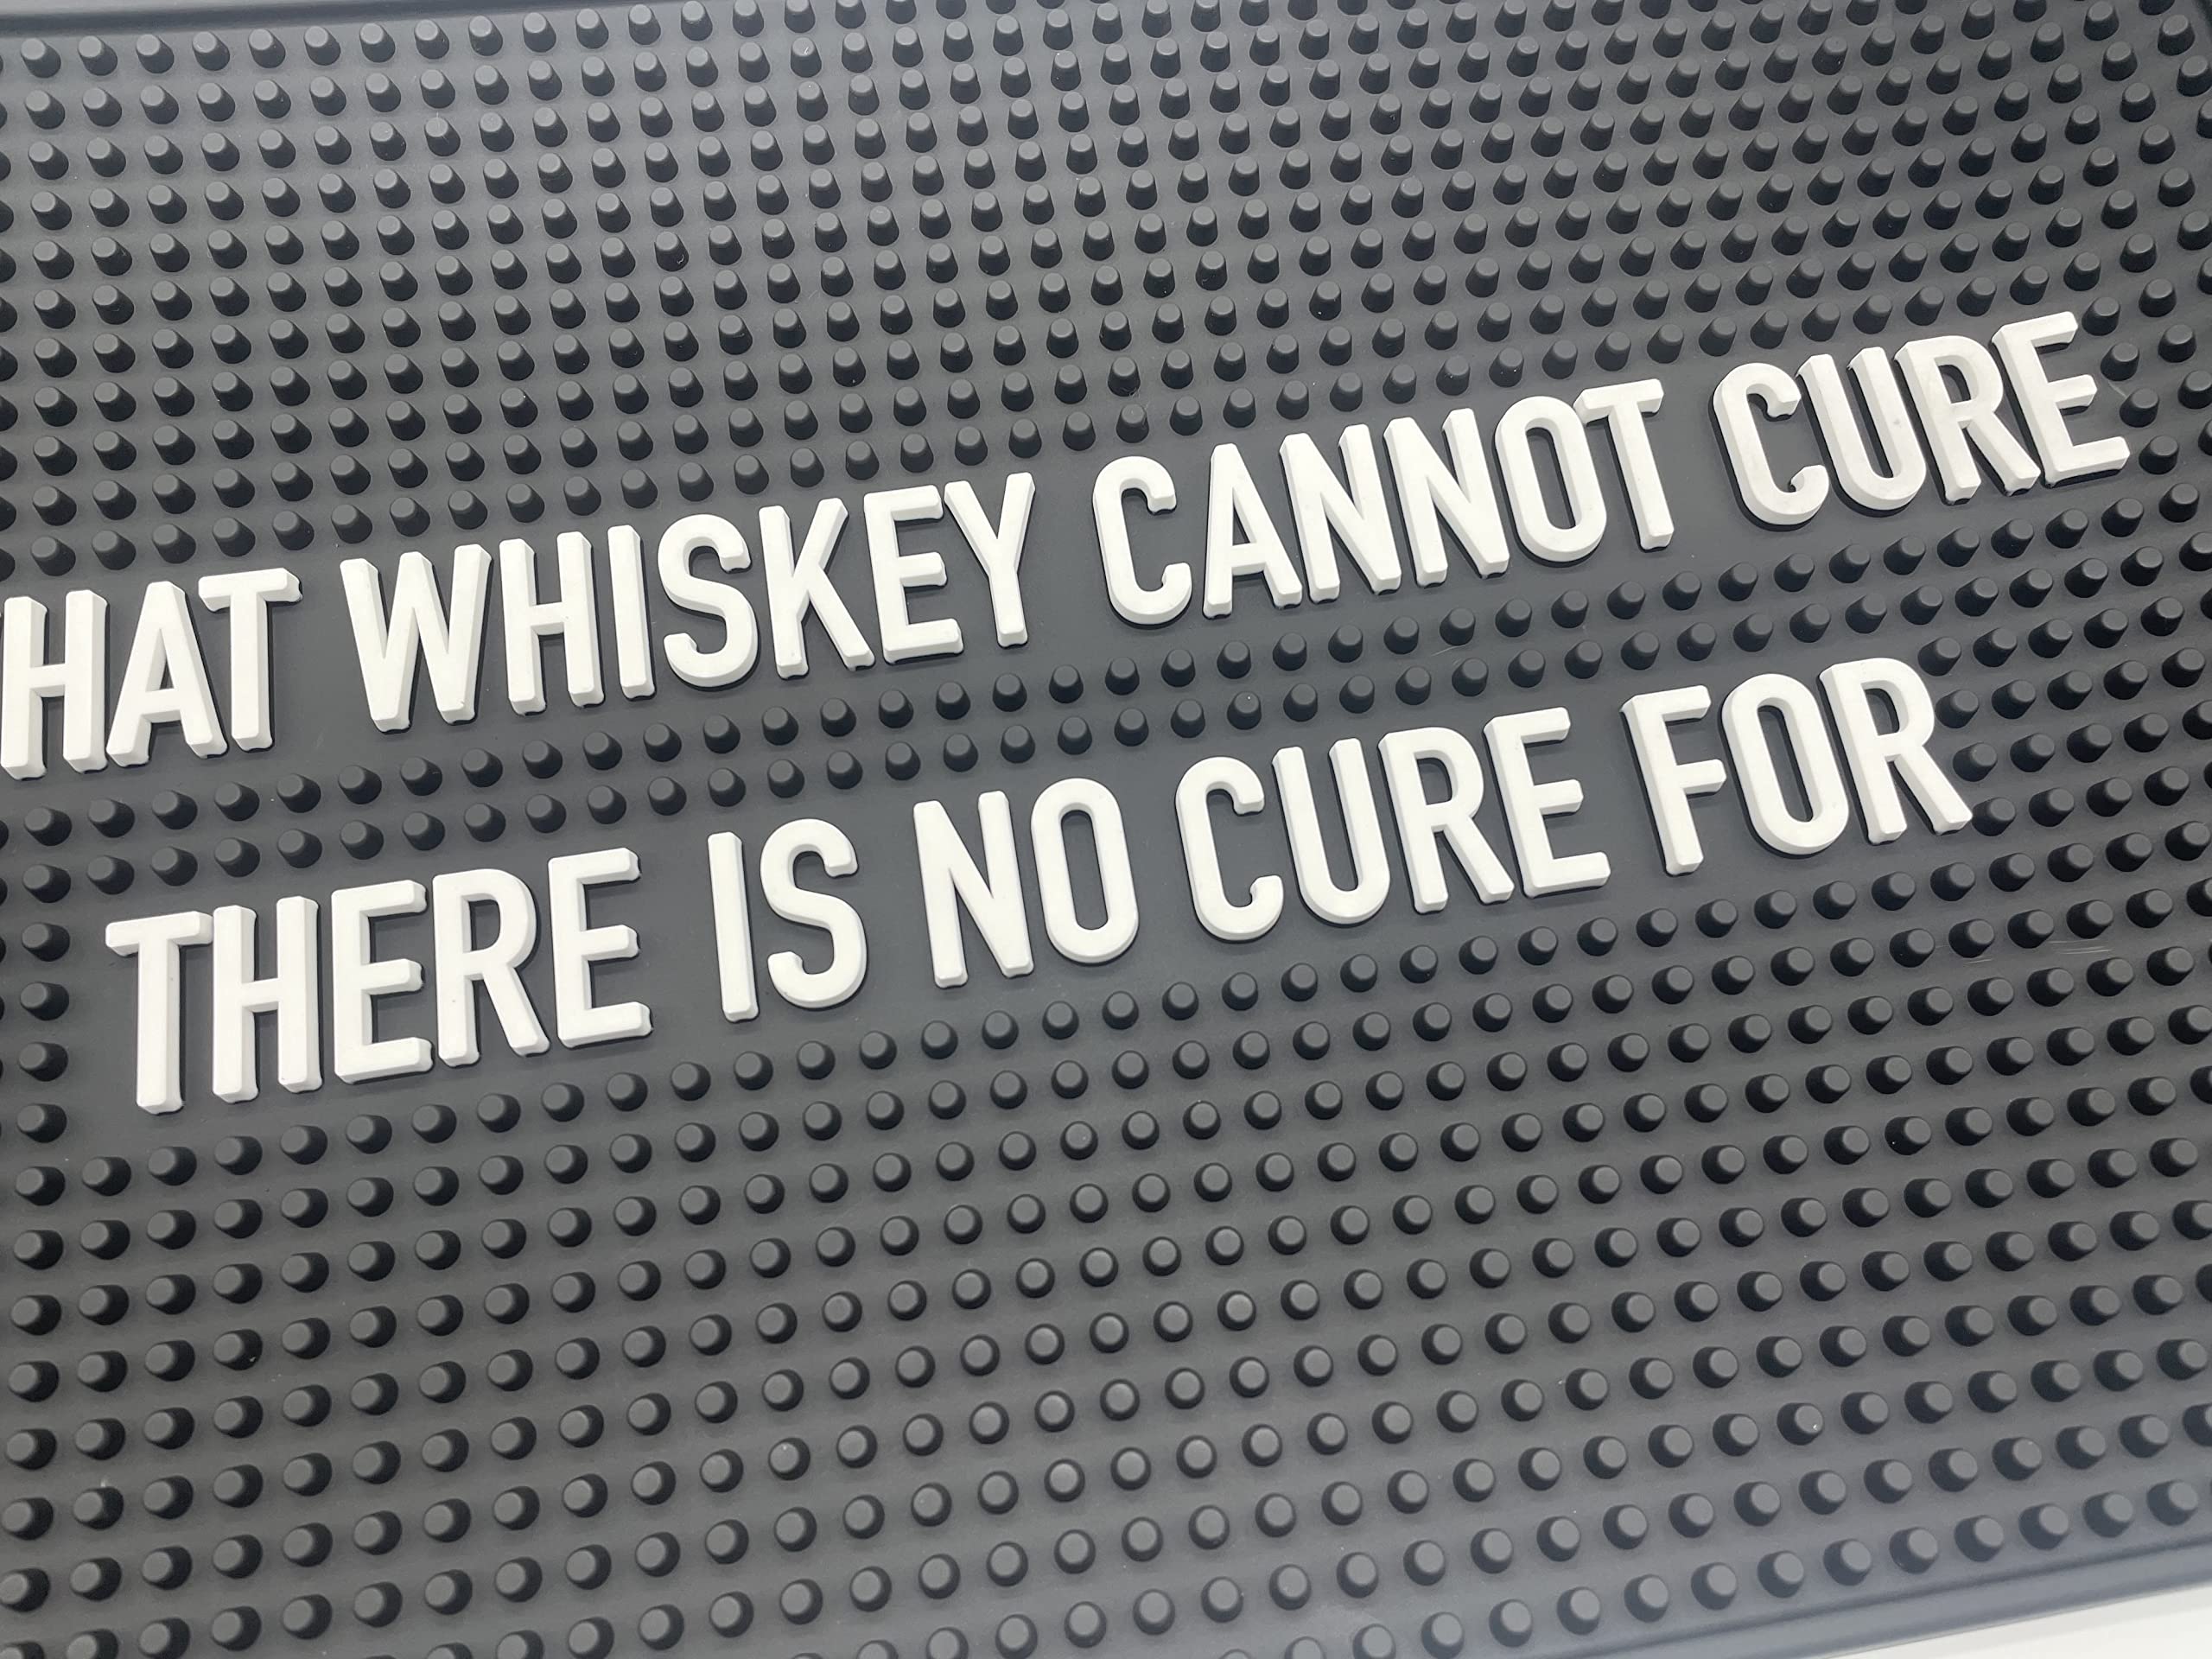 What Whiskey Cannot Cure There is No Cure for 17.7" x 11.8" Funny Bar Spill Mat Rail Countertop Accessory Home Pub Decor Slip Resistant Durable Covering for Craft Brewery Kitchen Cafe and Restaurant